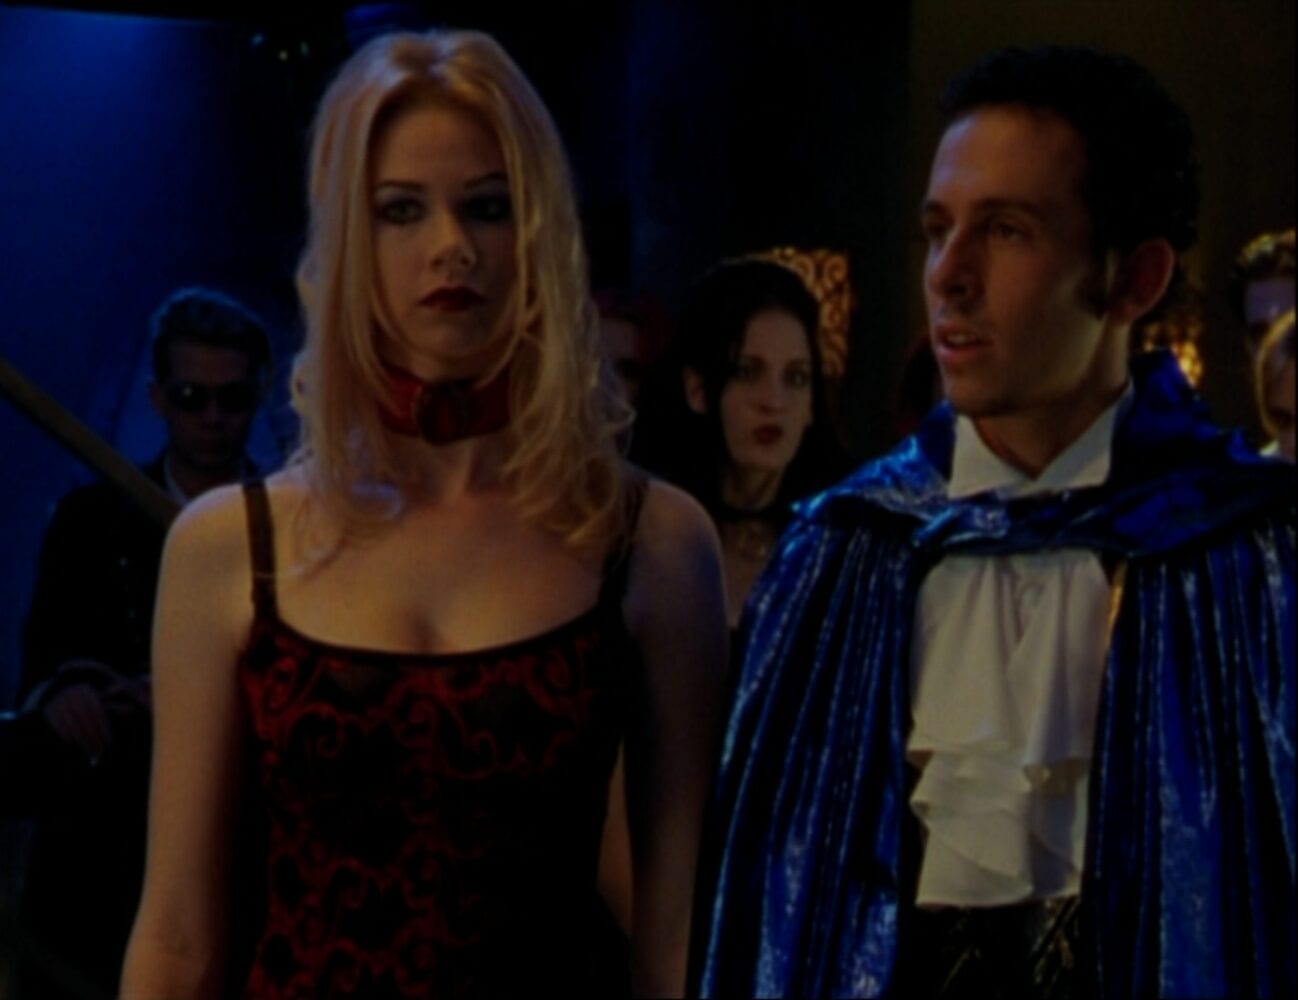 Wearing a dark red dress and a choker, Chanterelle stands in the club with Diego, who wears a ruffled shirt and blue cape, and the rest of the vampire cult, also dressed in vampire attire